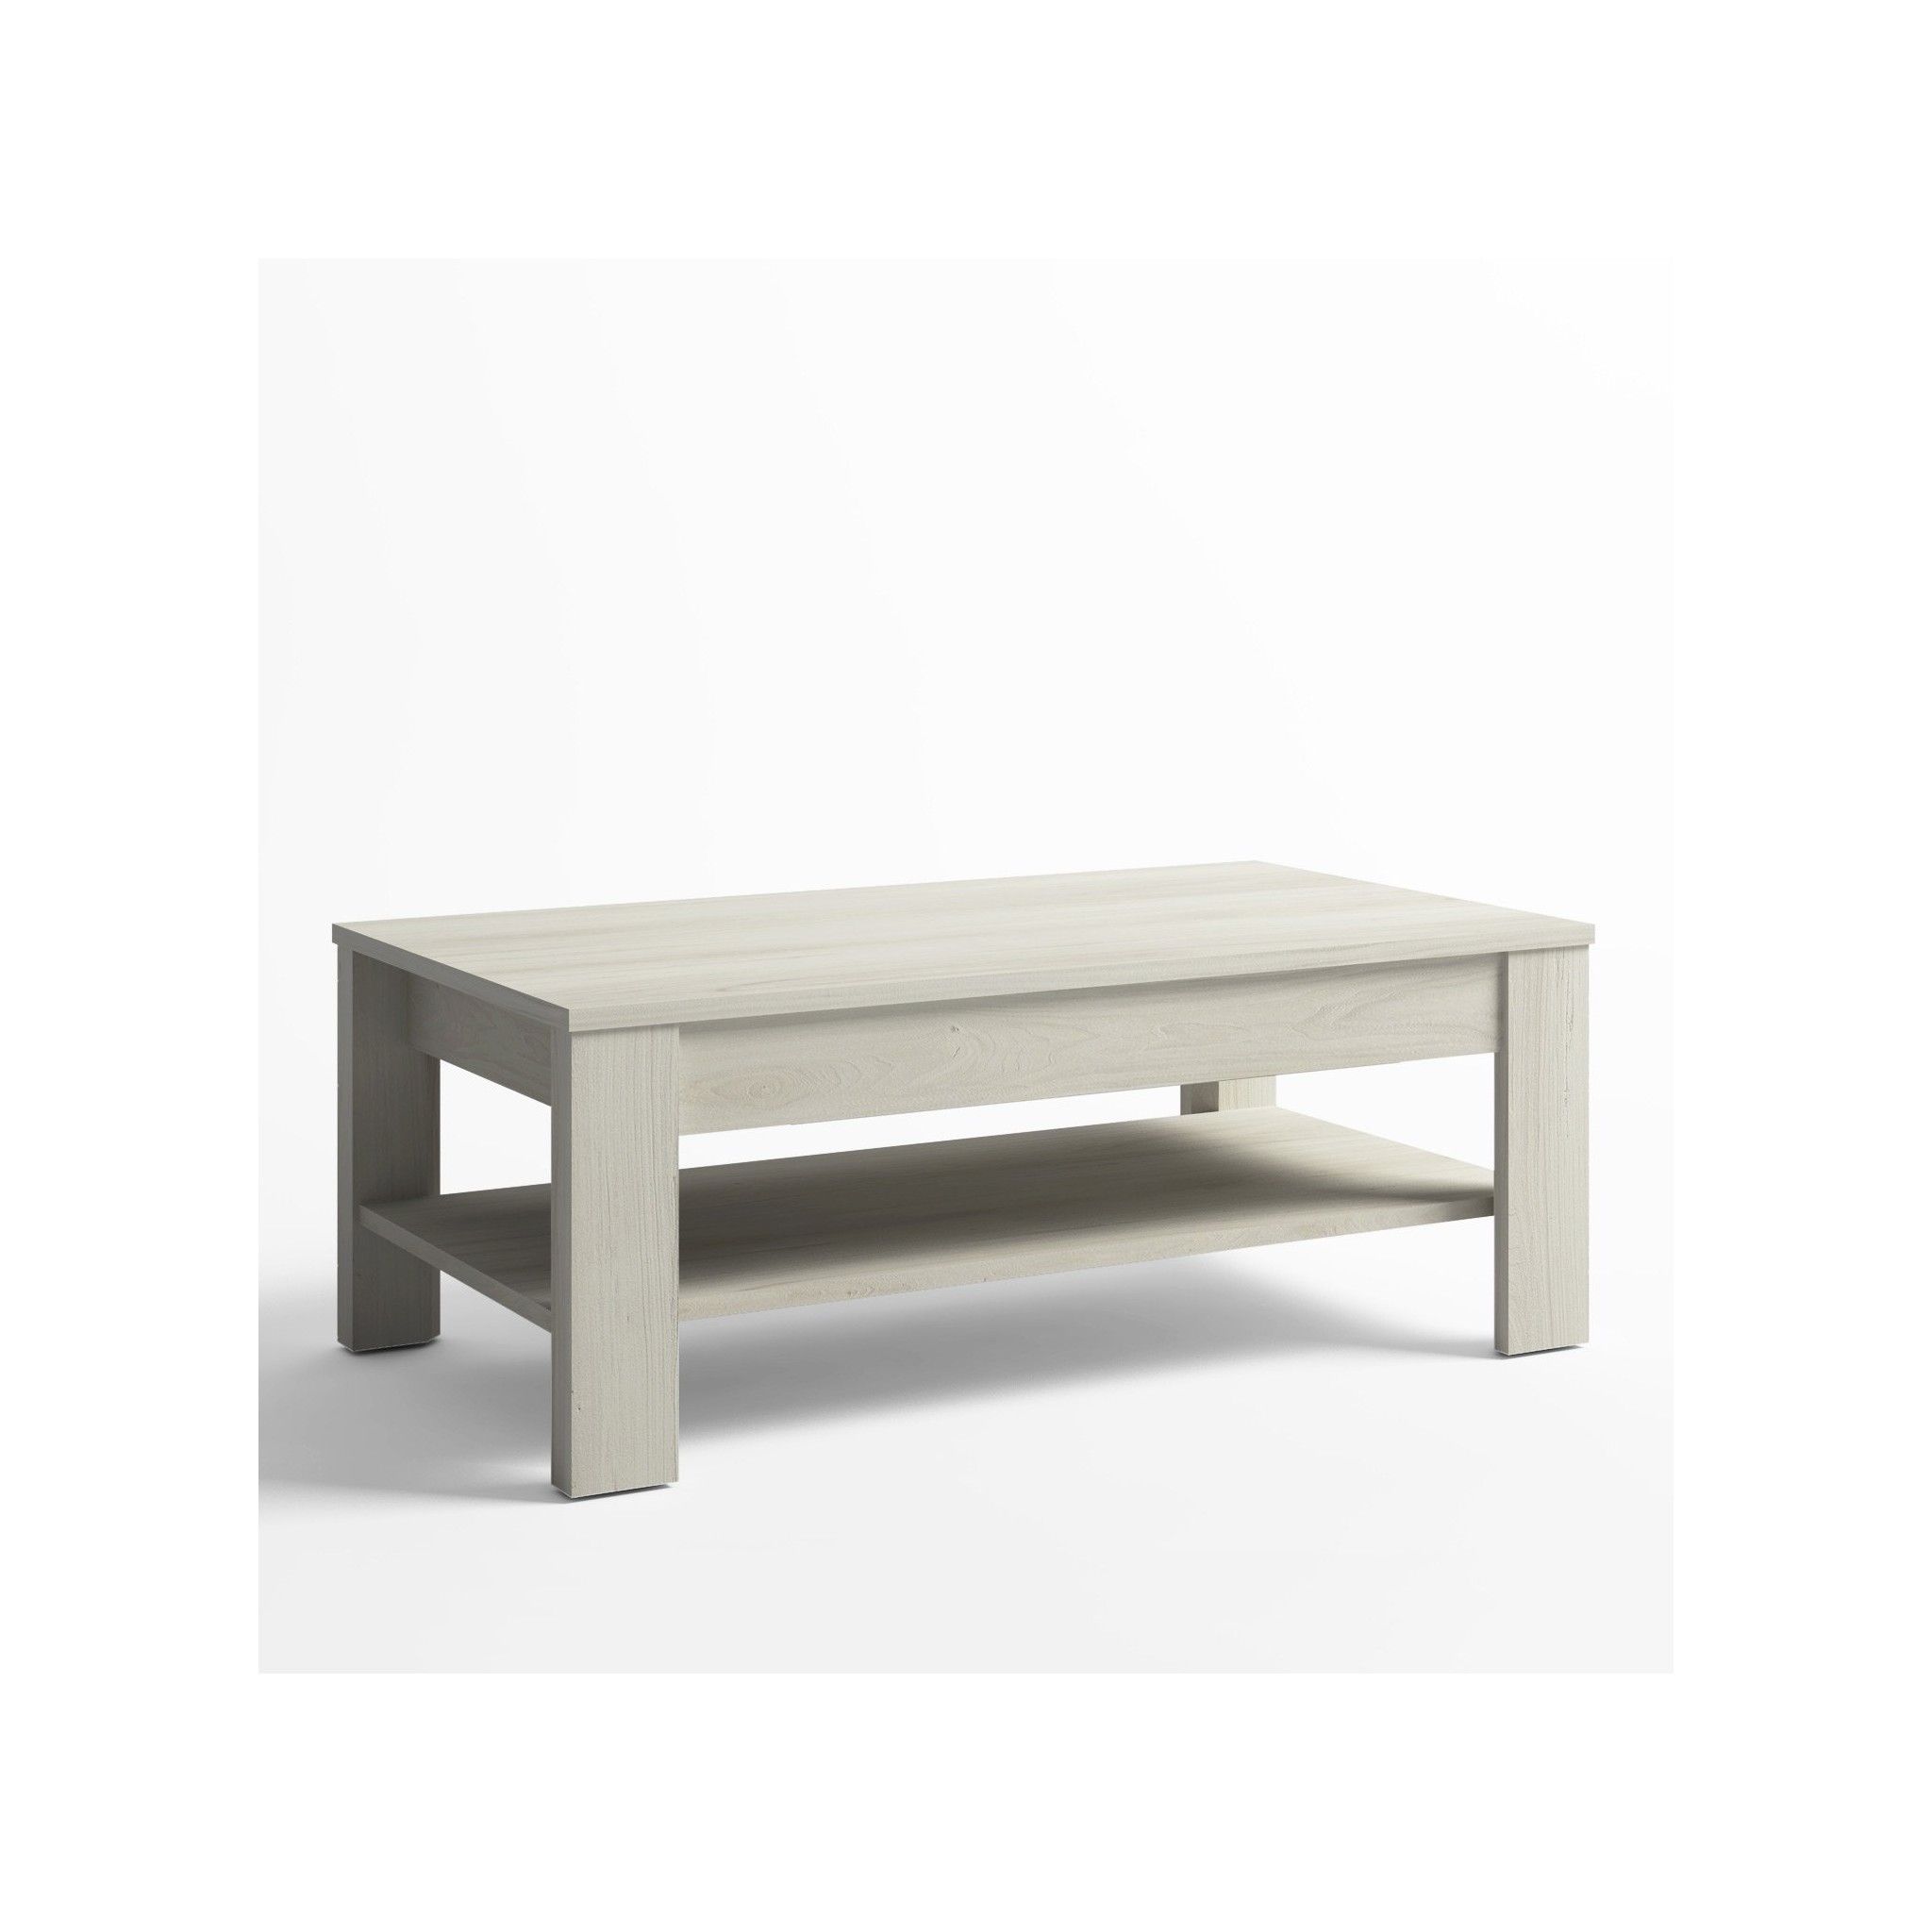 TABLE BASSE RELEVABLE TREND - Table basse 